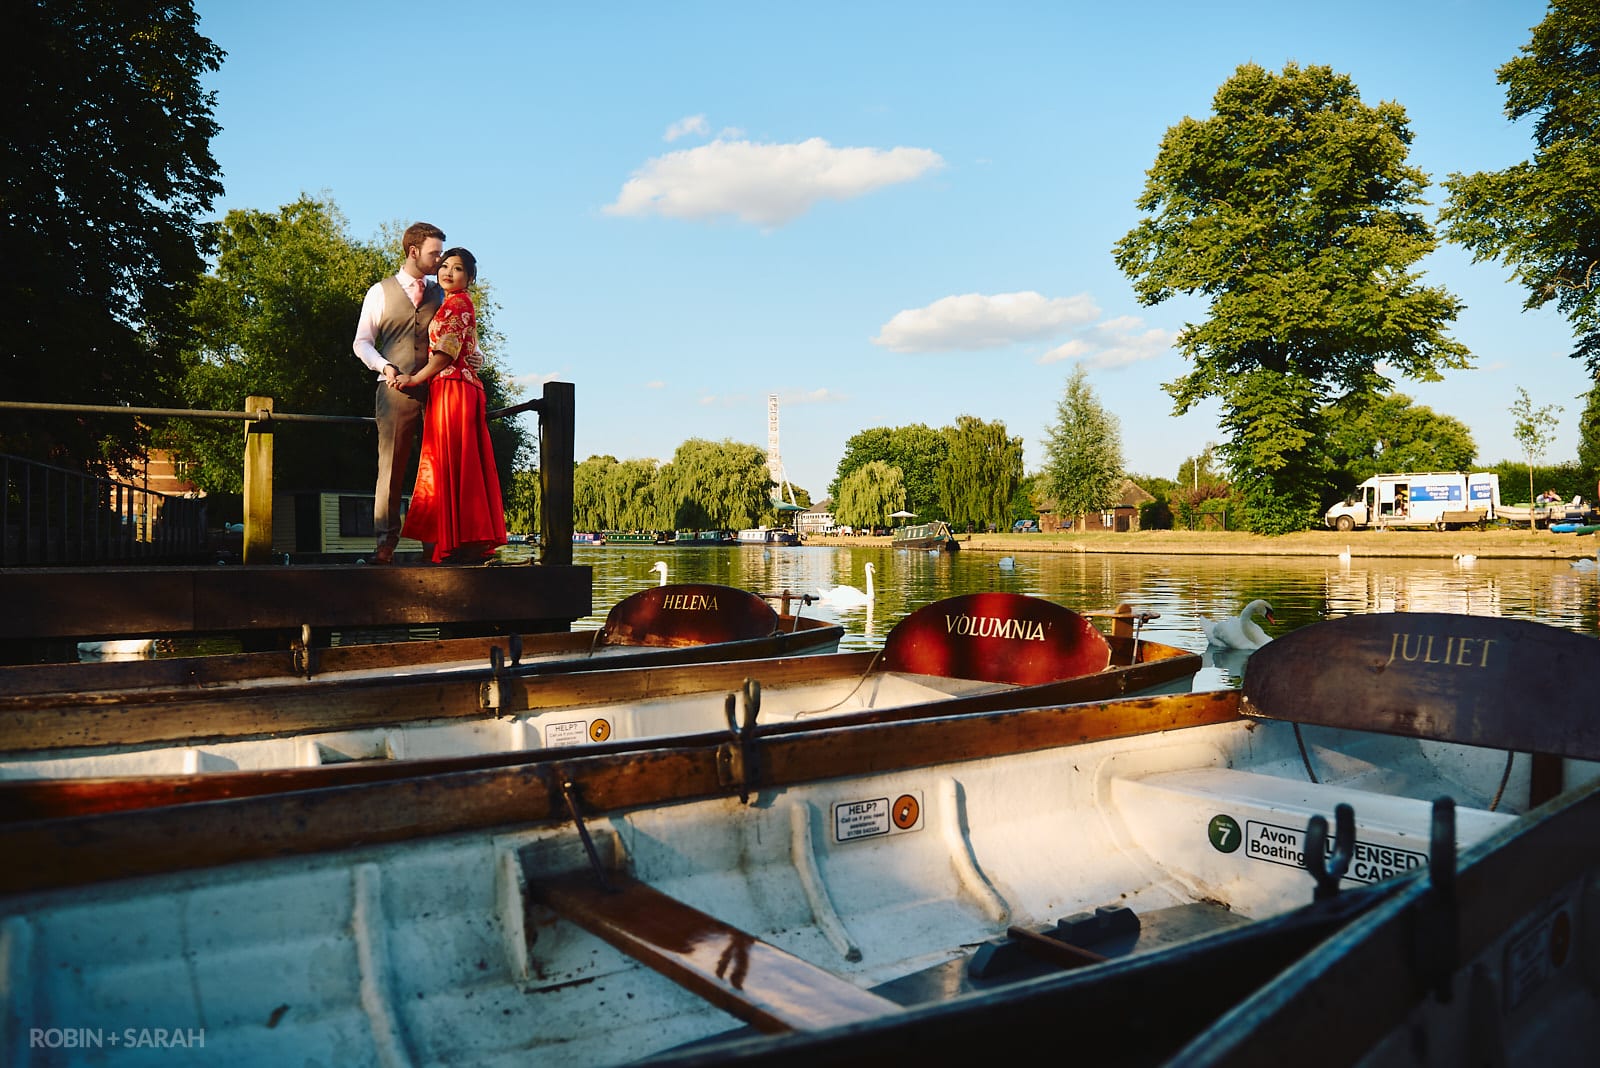 Bride and groom with boats on river Avon in Stratford